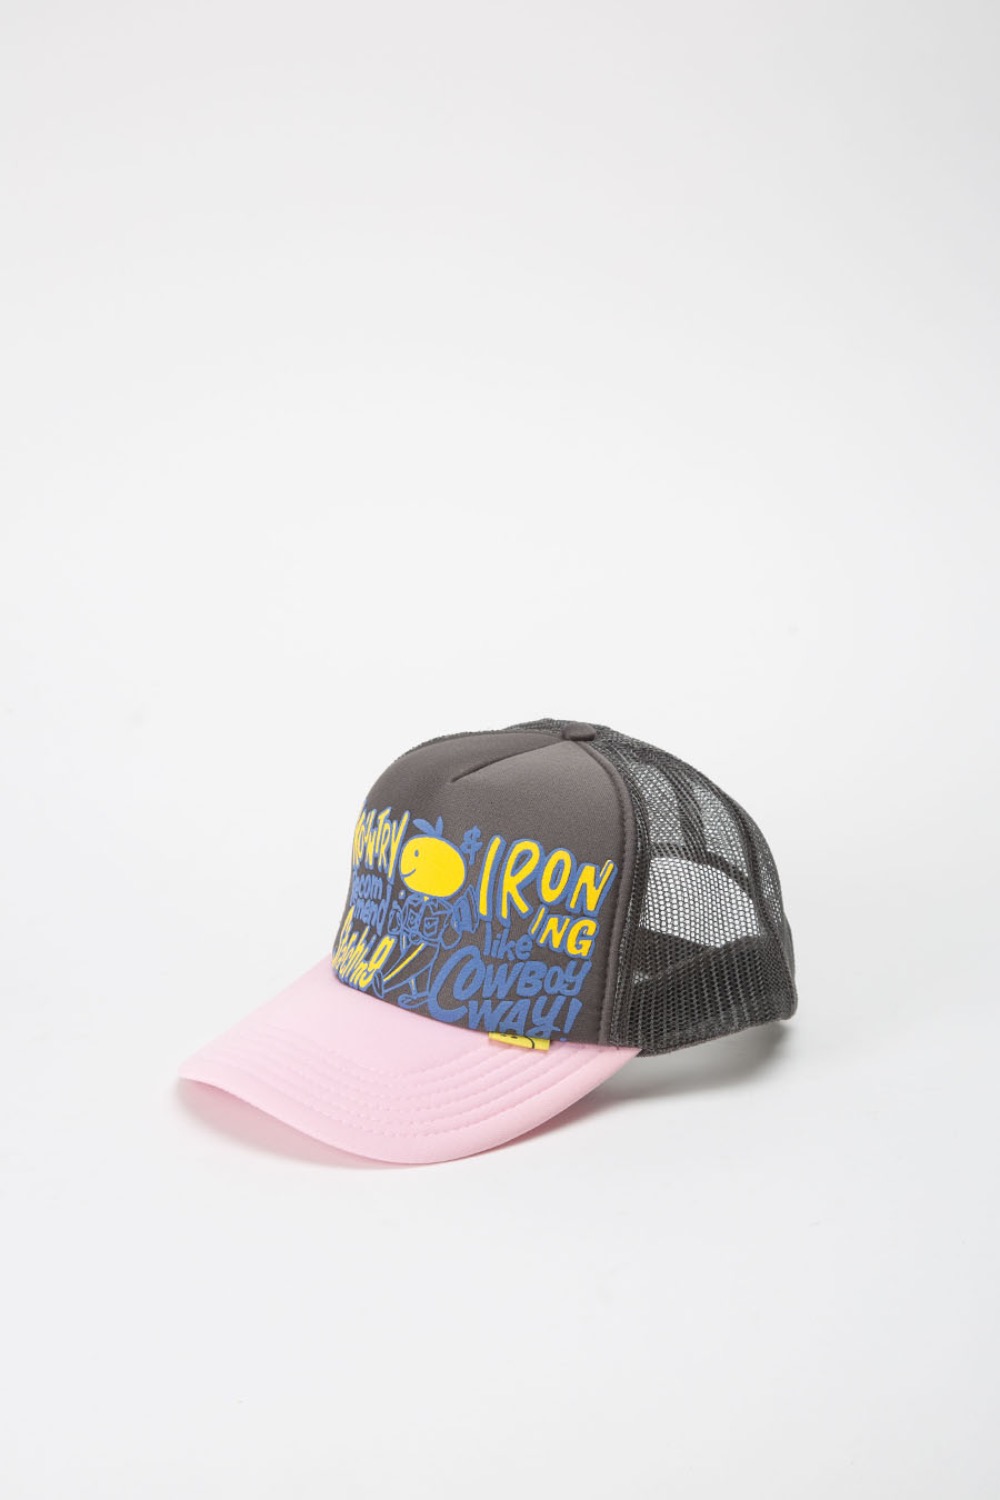 (23SS) CONEYCOWBOWY Trucker CAP CharcoalGray x PINK